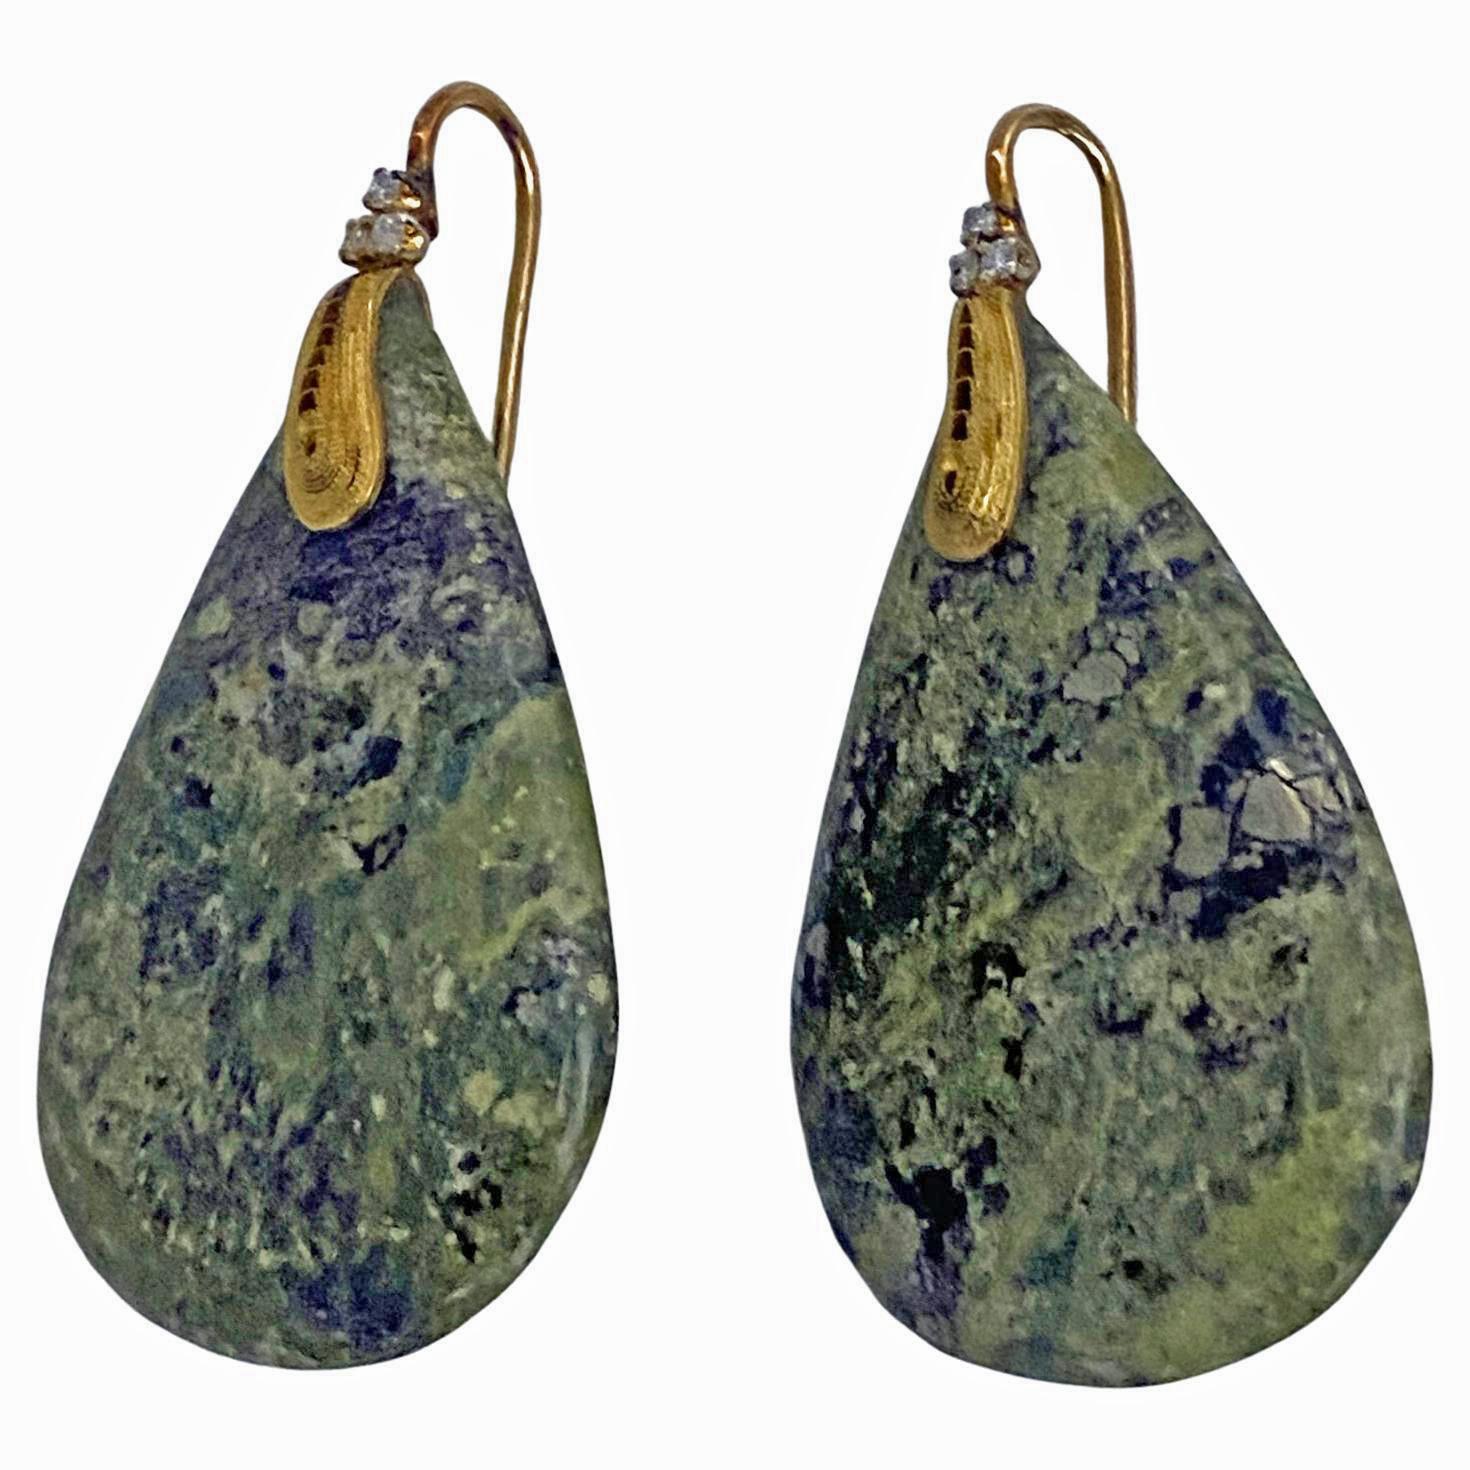 Pair of 18K green Agate and Diamond drop Earring. Each suspending a polished large pear shape green agate with mottled with black and white coloring. The 18K gold surmounts of an etruscan swirl design, each with three small full cut diamonds.